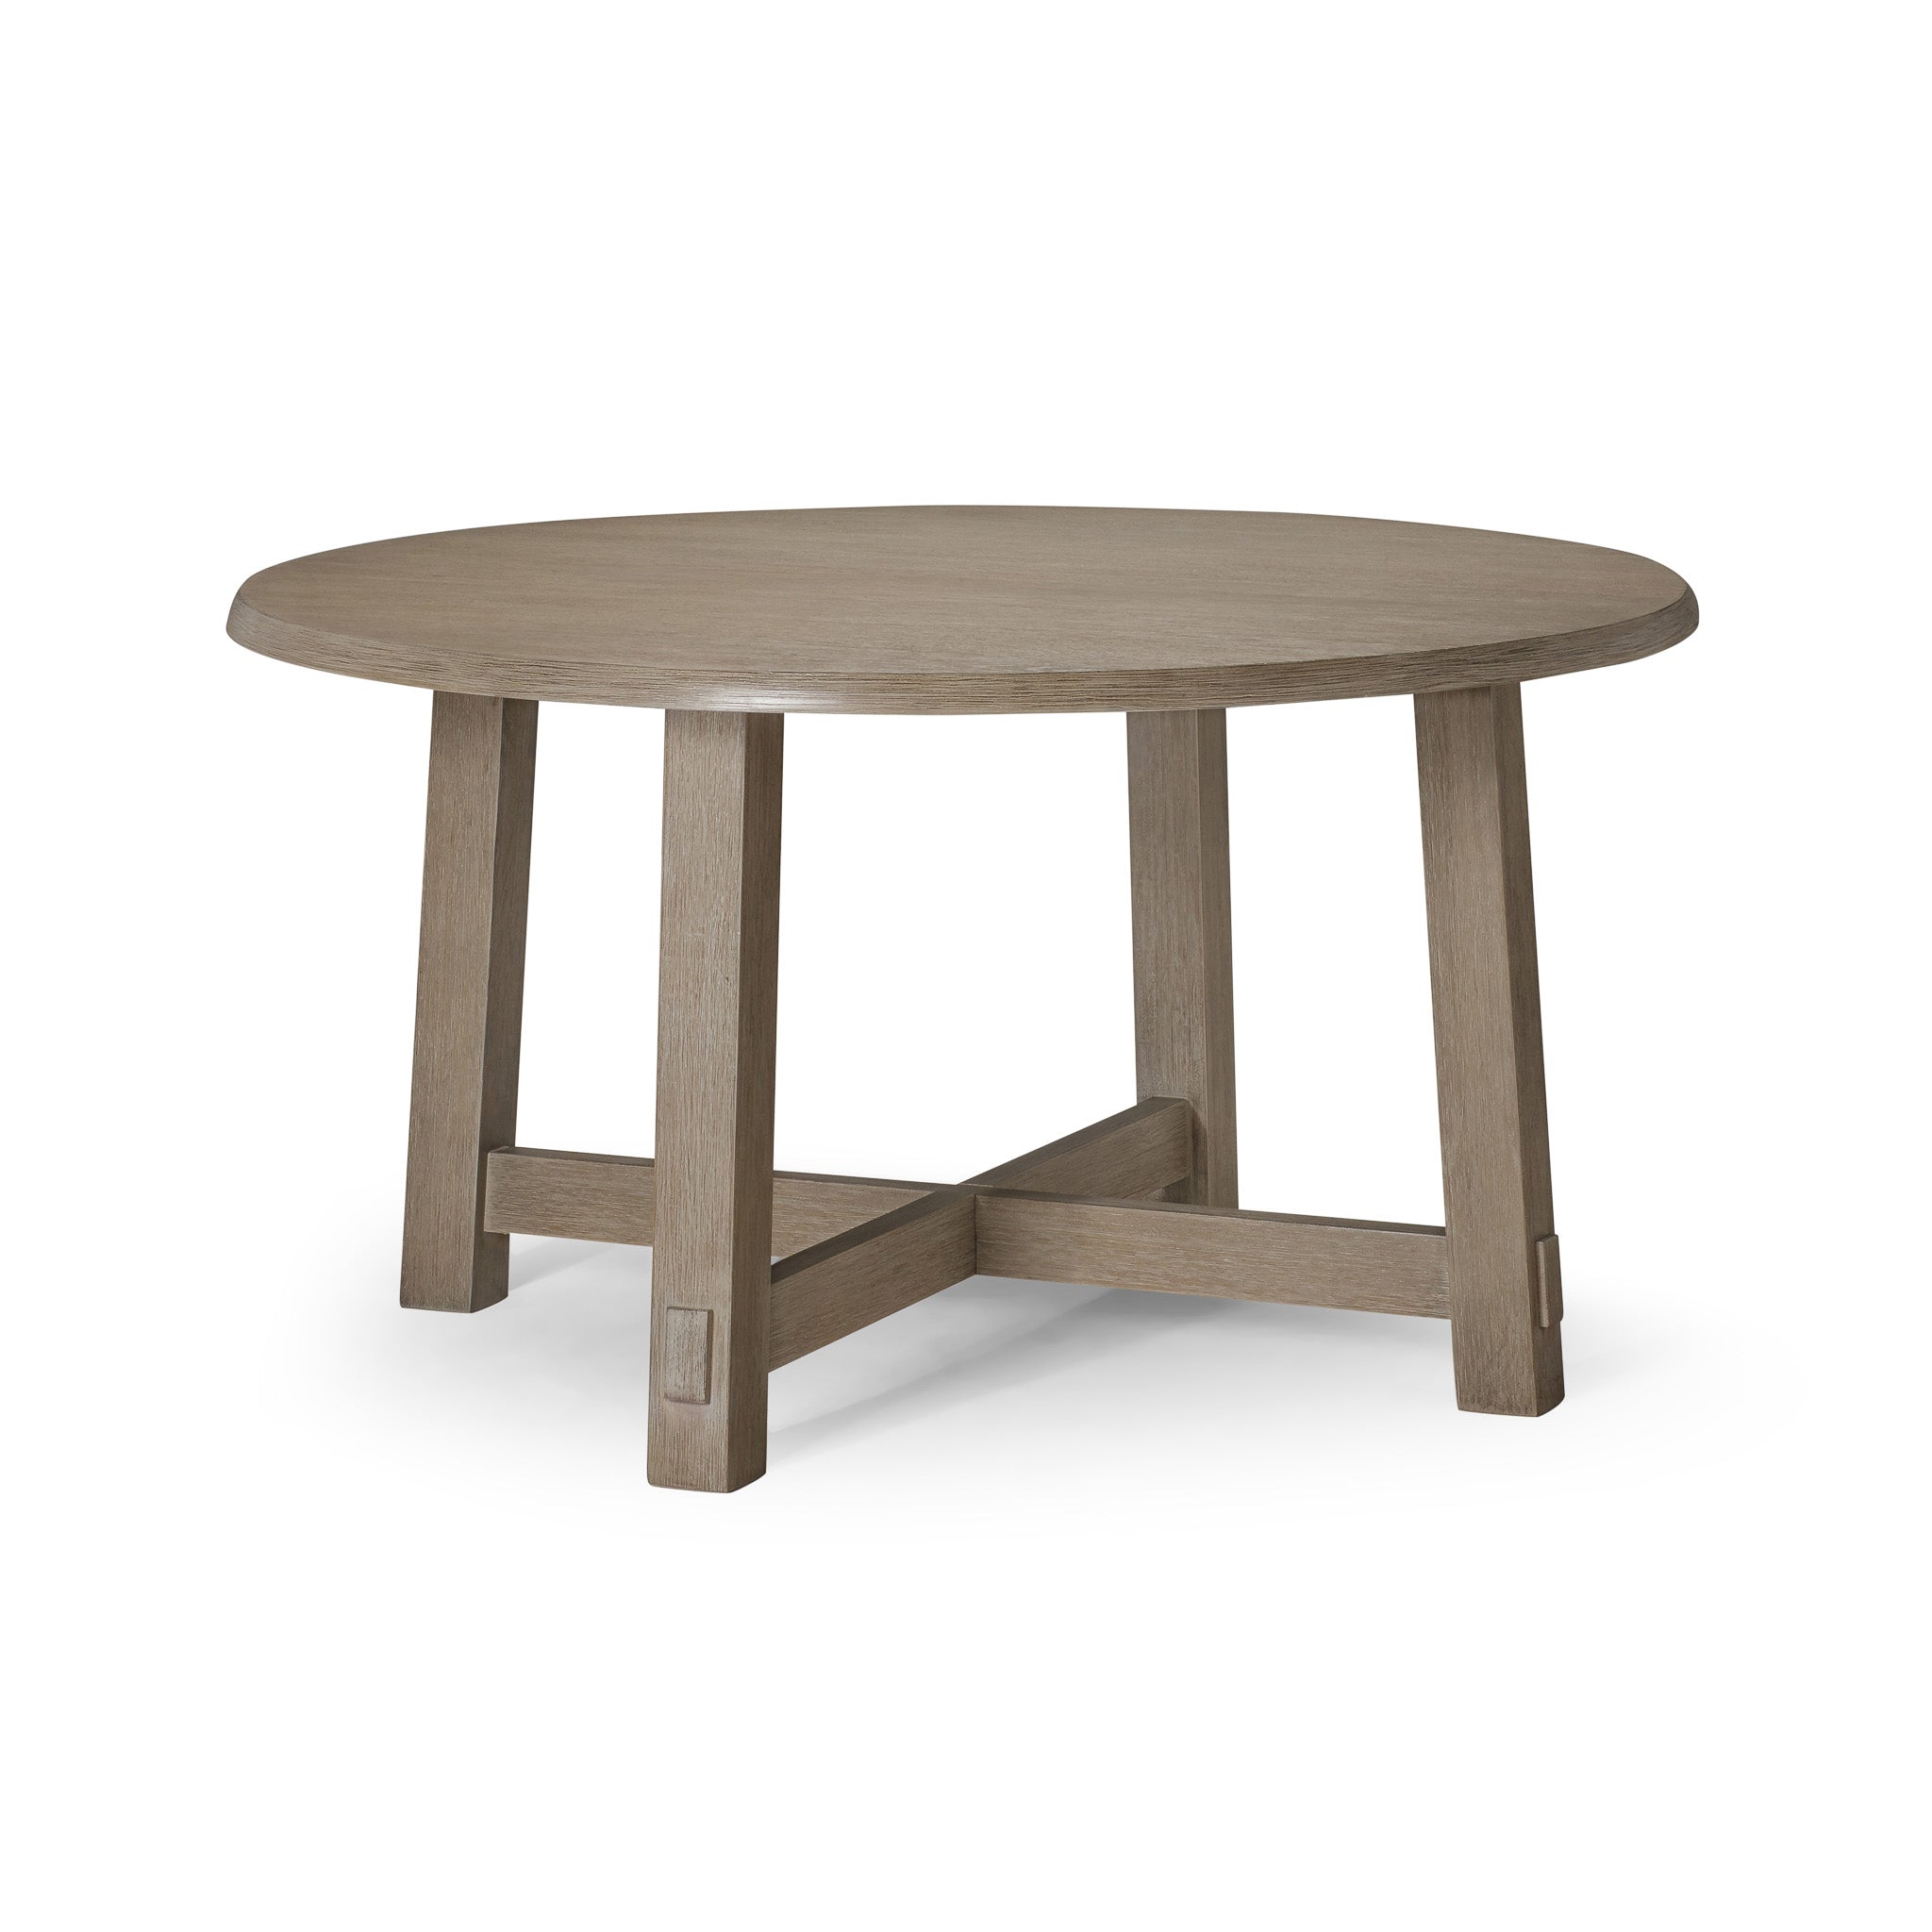 Sasha Organic Round Wooden Dining Table in Weathered Grey Finish in Dining Furniture by Maven Lane